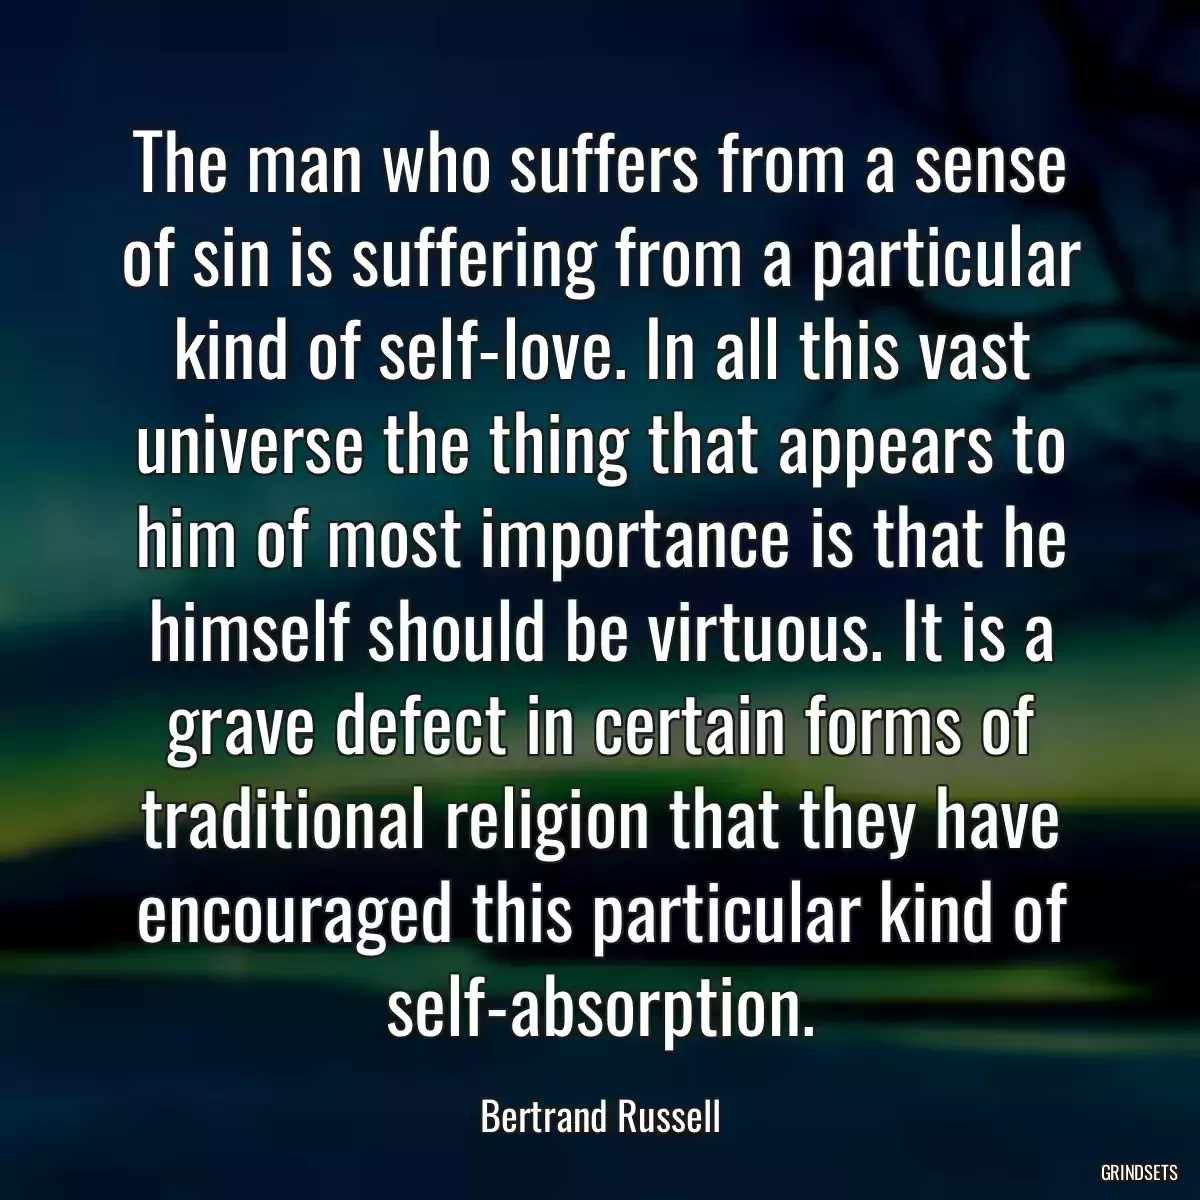 The man who suffers from a sense of sin is suffering from a particular kind of self-love. In all this vast universe the thing that appears to him of most importance is that he himself should be virtuous. It is a grave defect in certain forms of traditional religion that they have encouraged this particular kind of self-absorption.